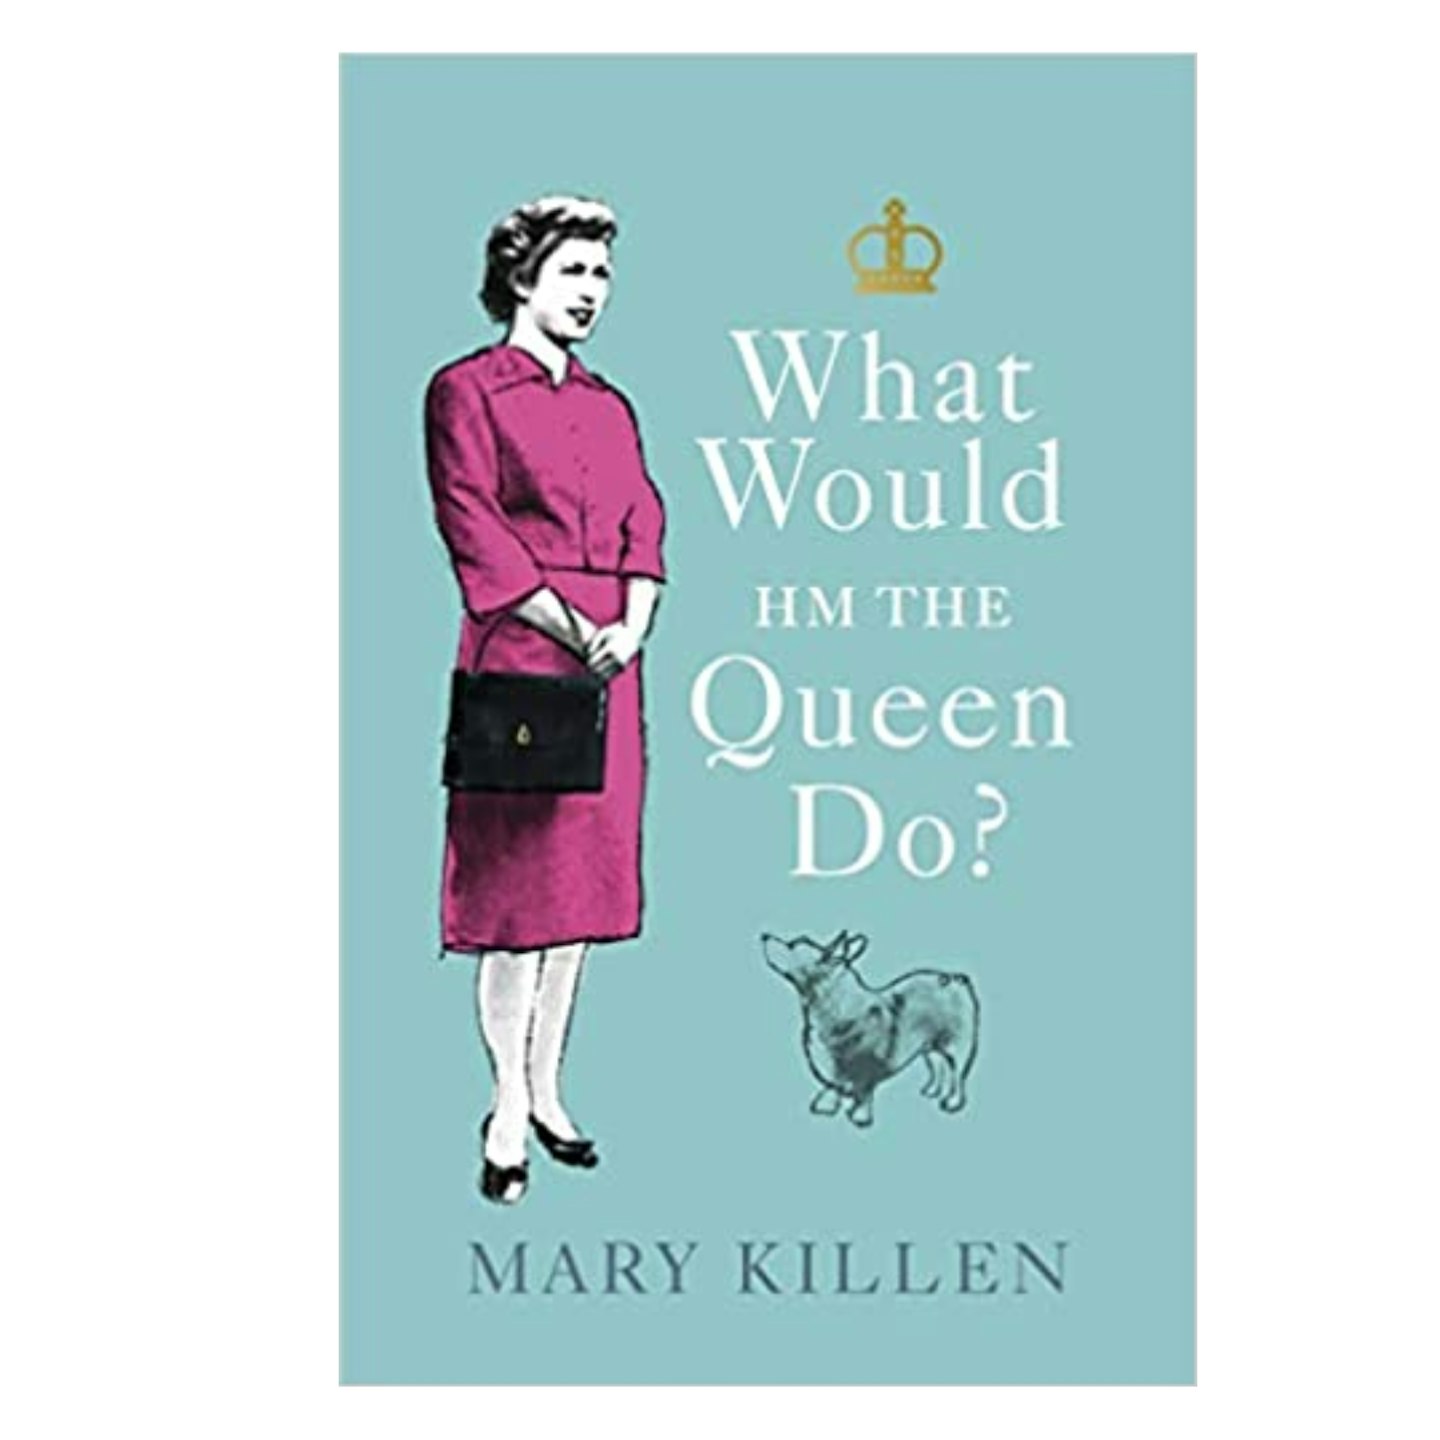 What would the queen do